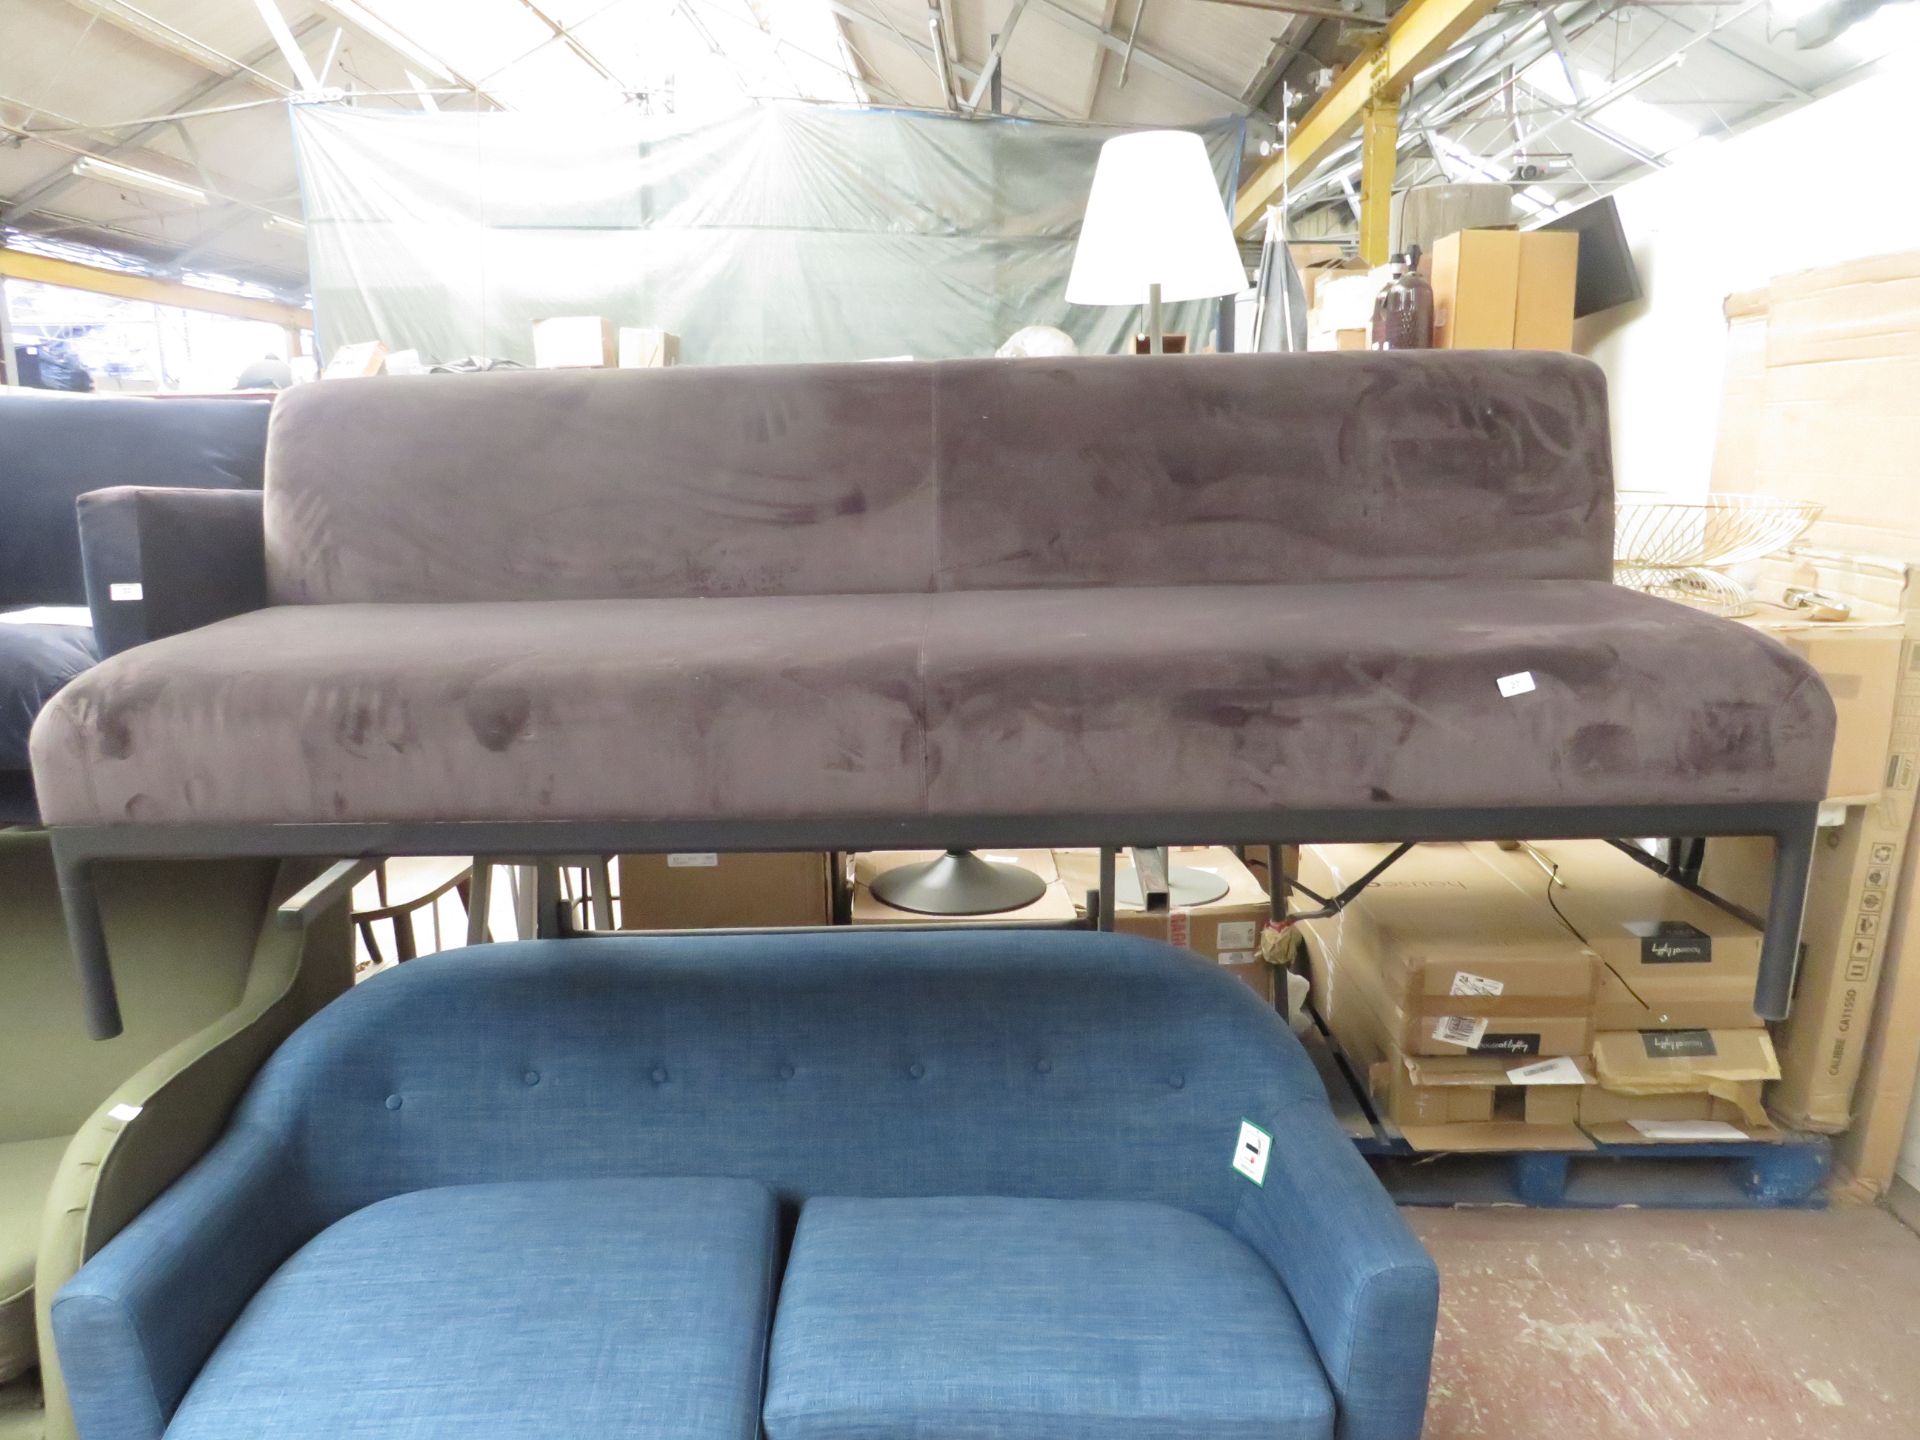 | 1x | PERASON LLOYD EDGE BENCH | SOFA CUSHION IS IN GOOD CONITION BUT THERE MAY BE SMALL MINOR